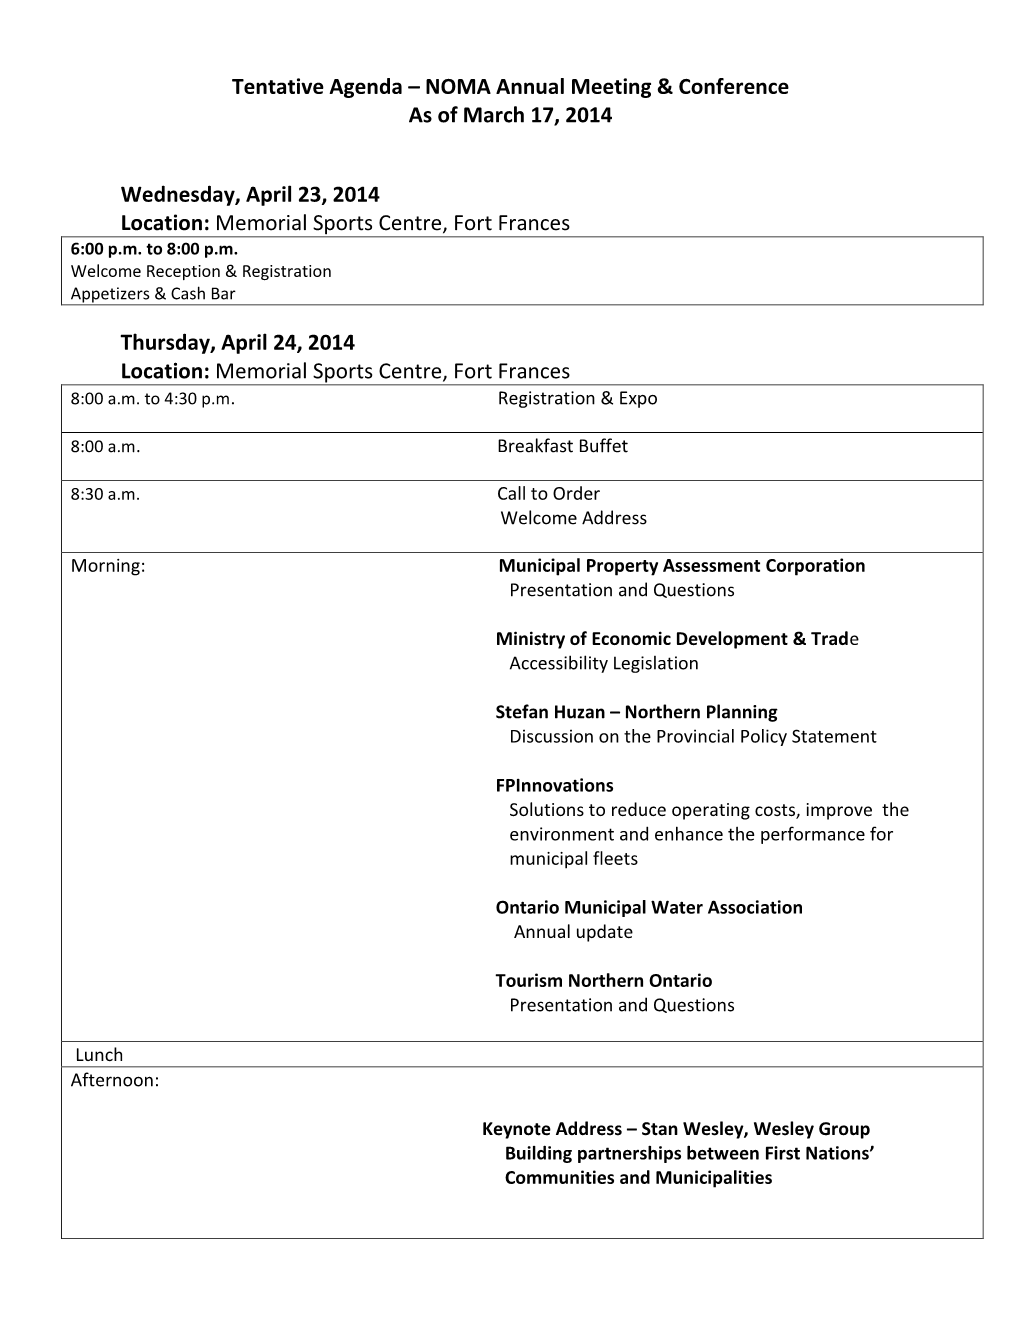 Tentative Agenda – NOMA Annual Meeting & Conference As of March 17, 2014